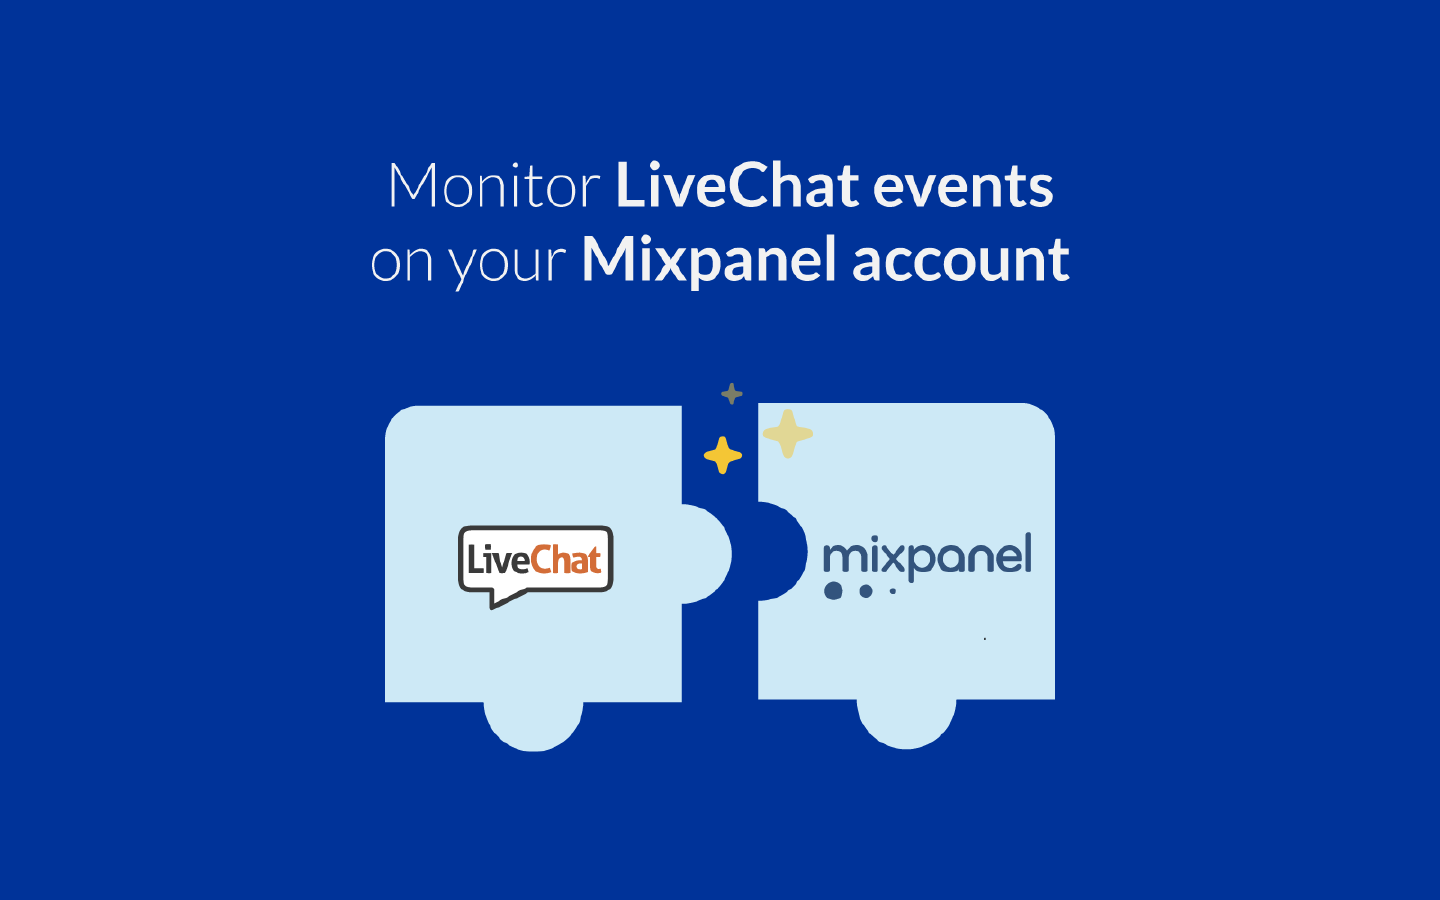 LiveChat integrates with Mixpanel